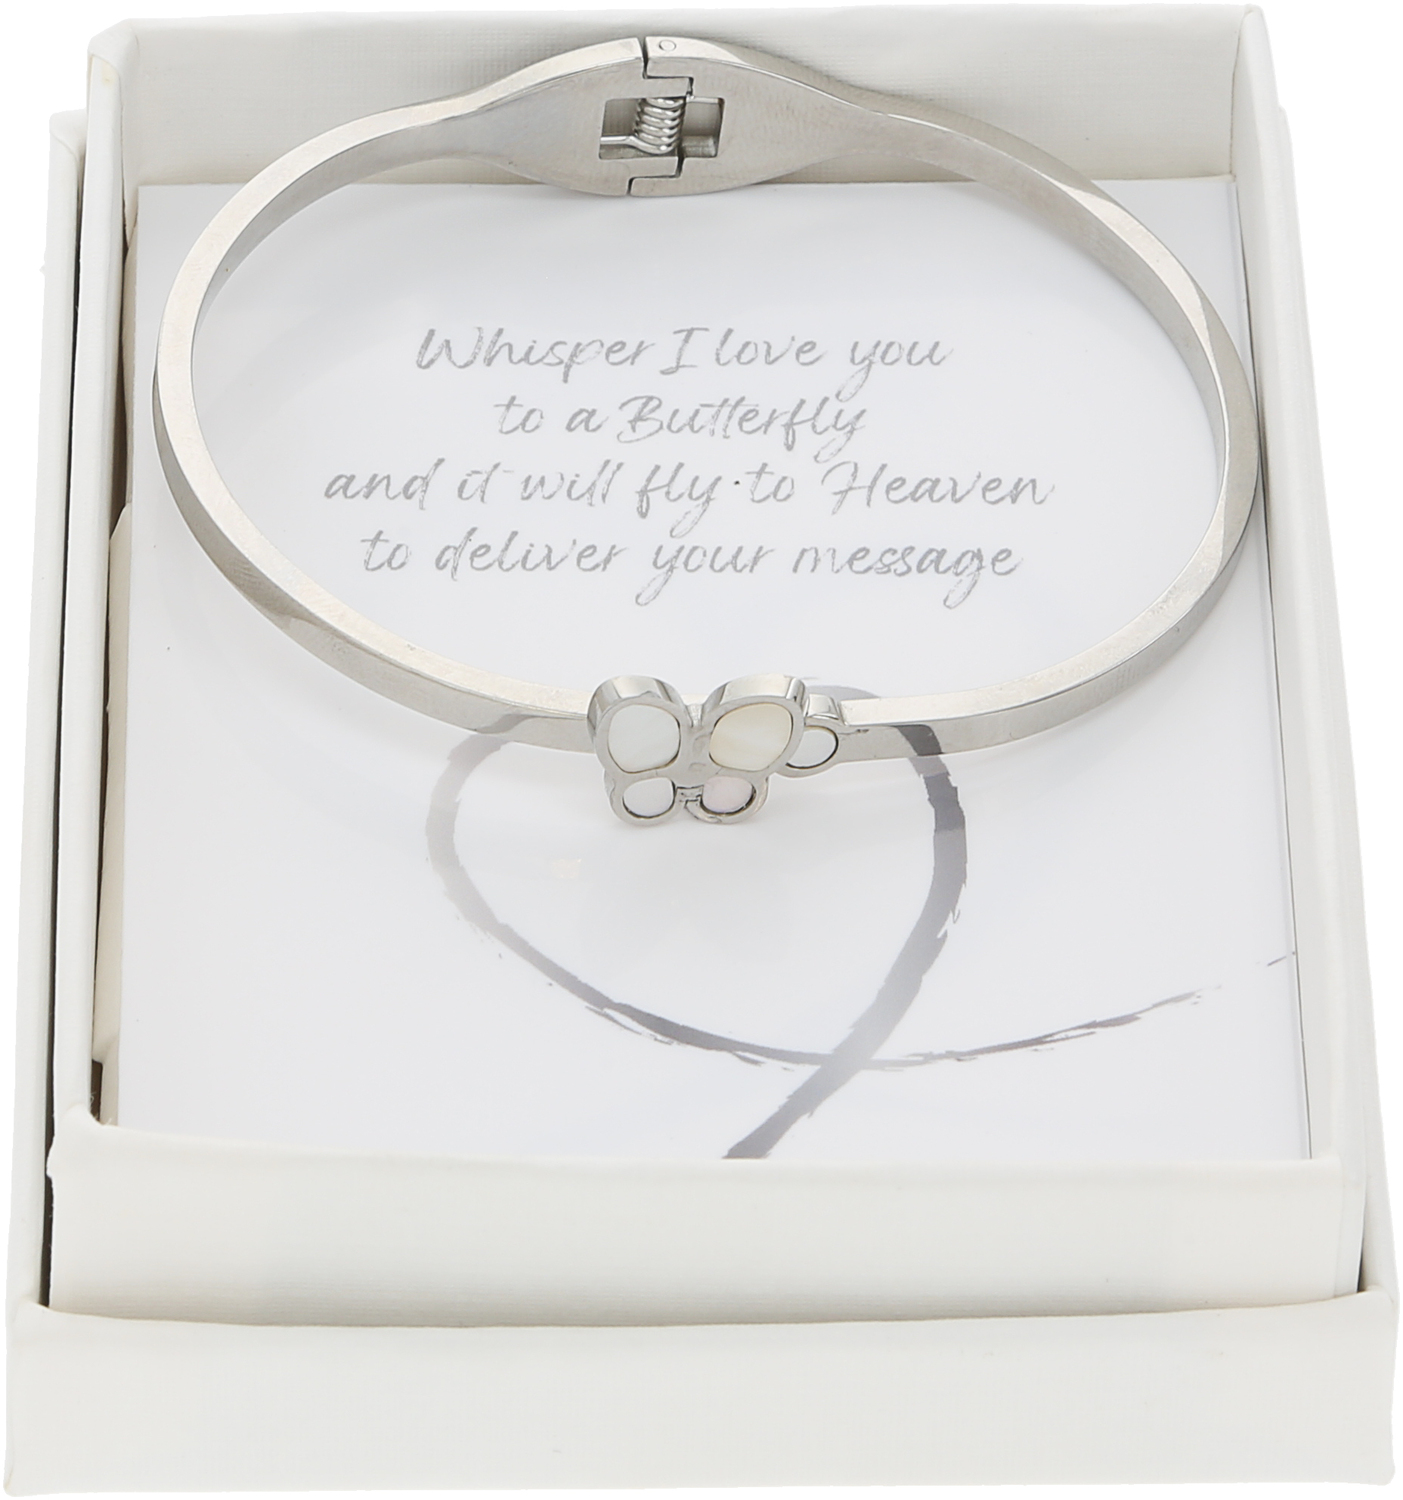 Fly to Heaven by Forever in our Hearts - Fly to Heaven - Stainless Steel Hinged Bangle Bracelet 